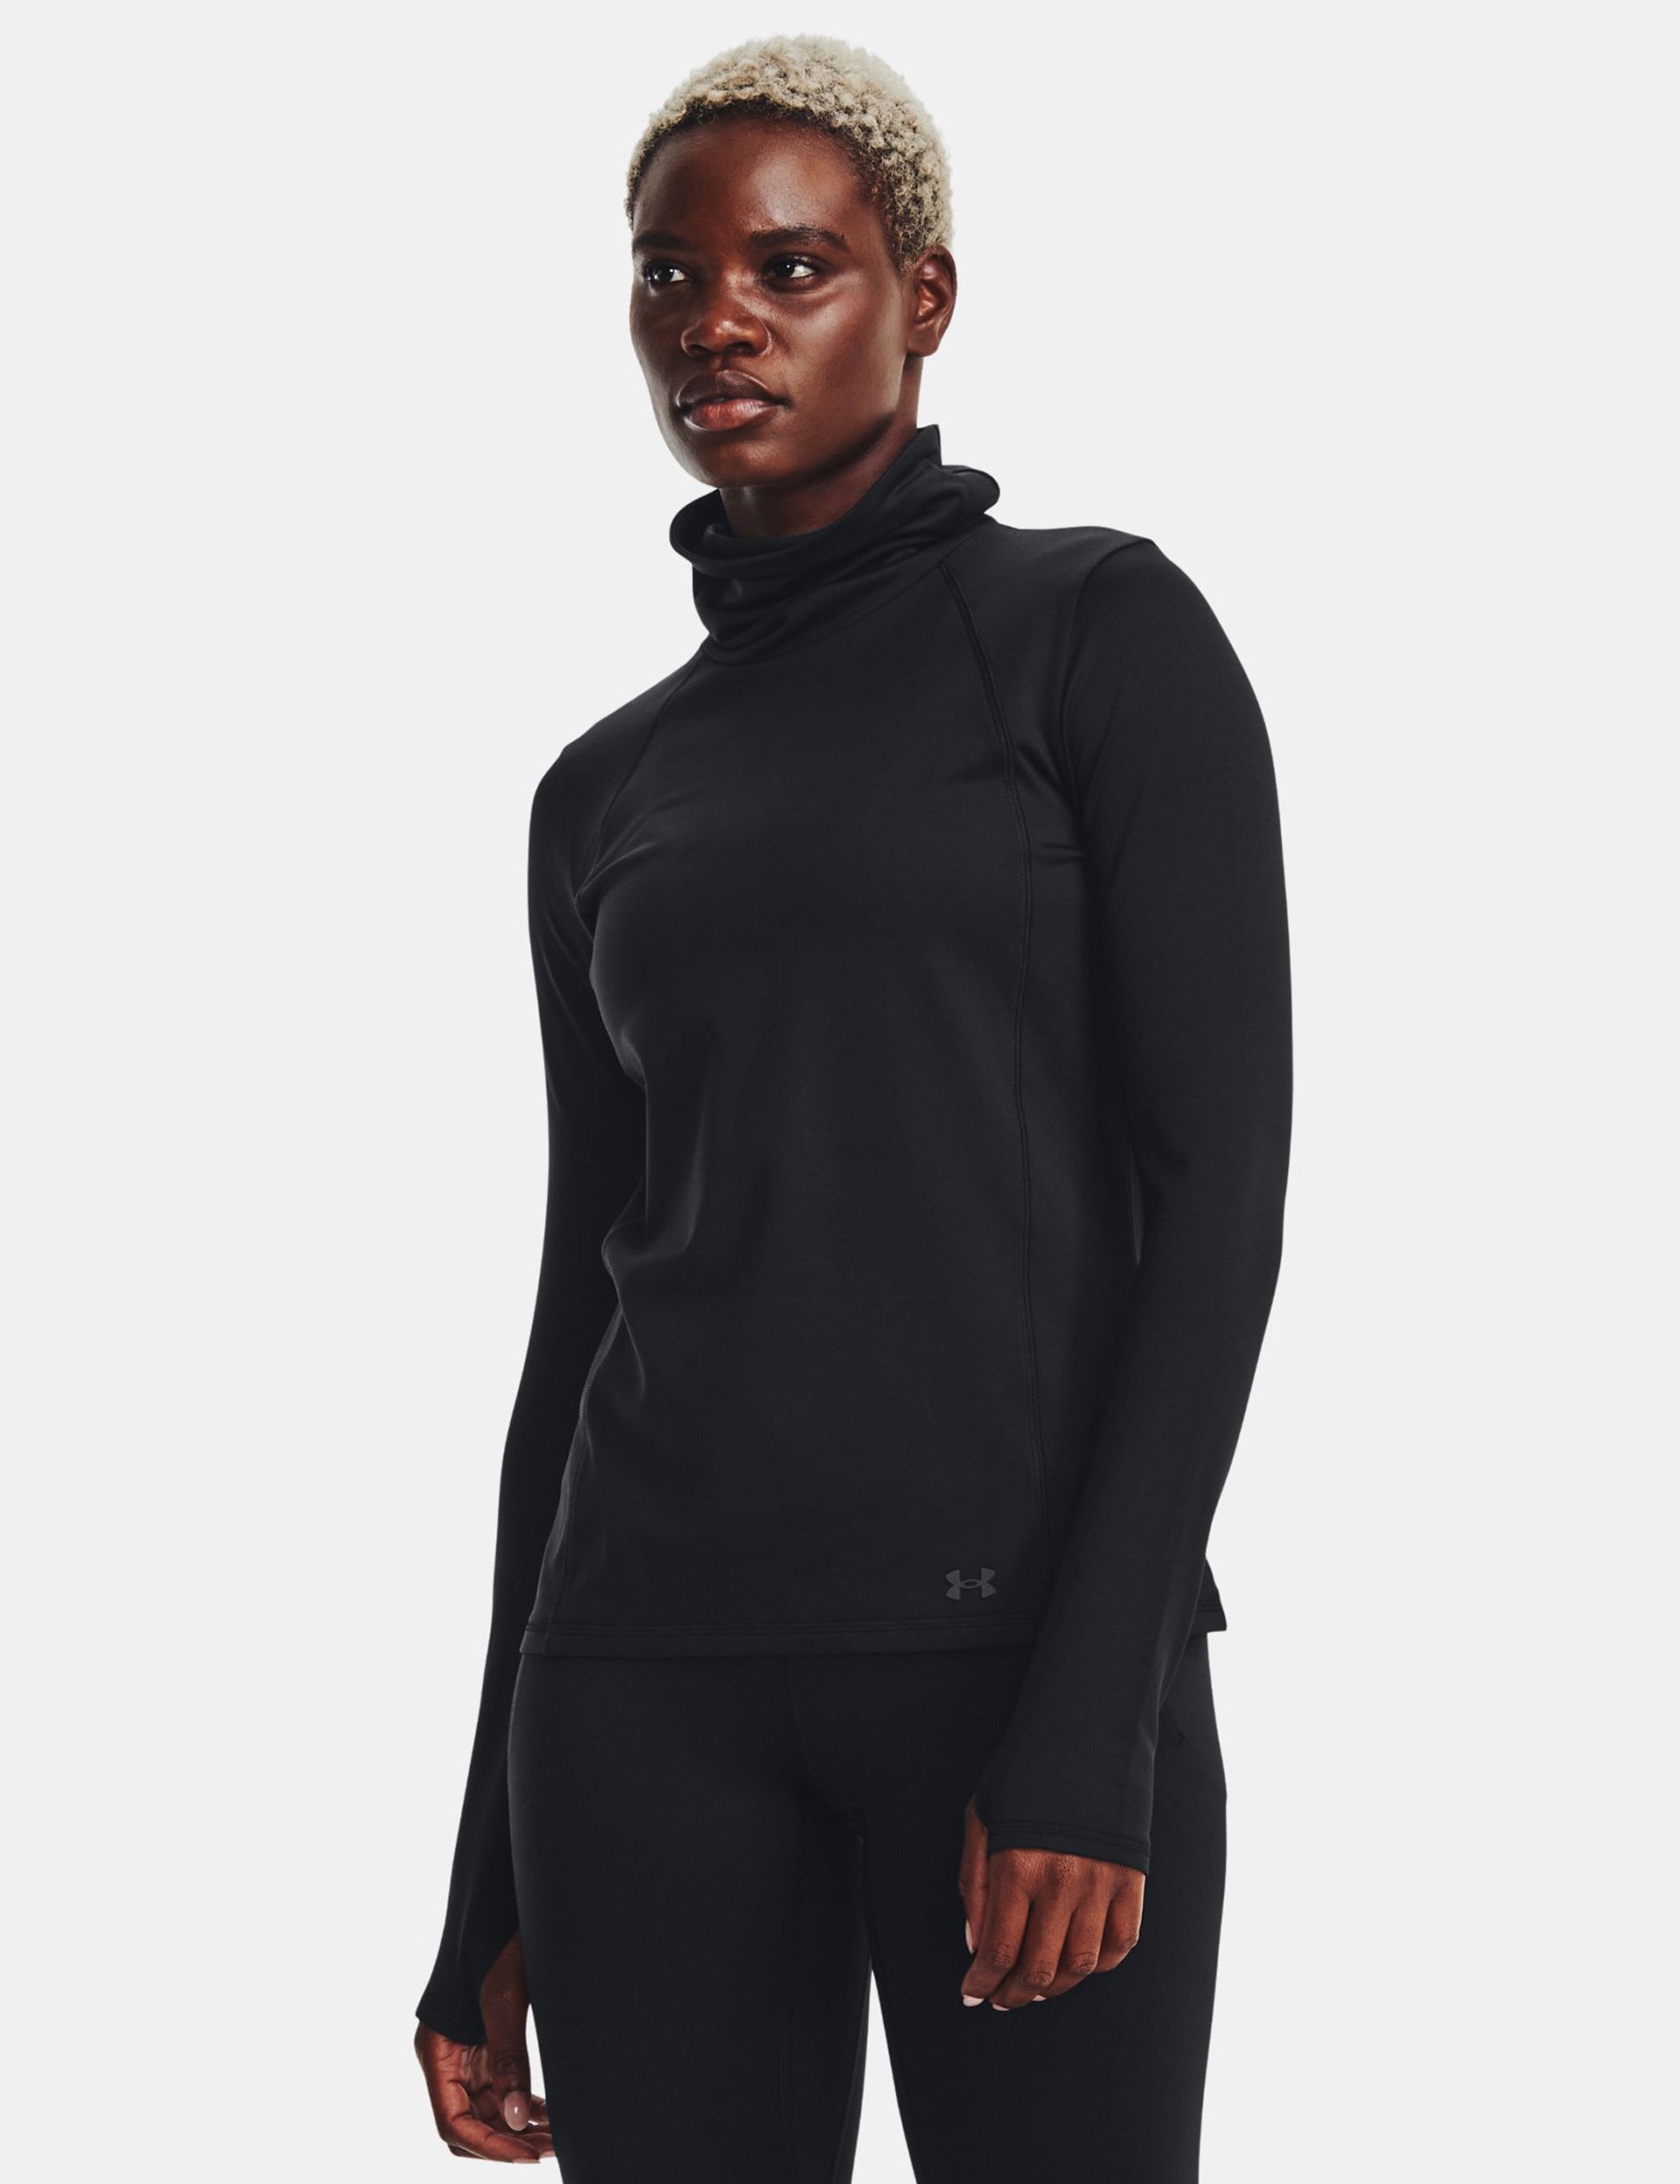 Under Armour Meridian Cold Weather Funnel Neck - Black/Jet Greyimage1- The Sports Edit